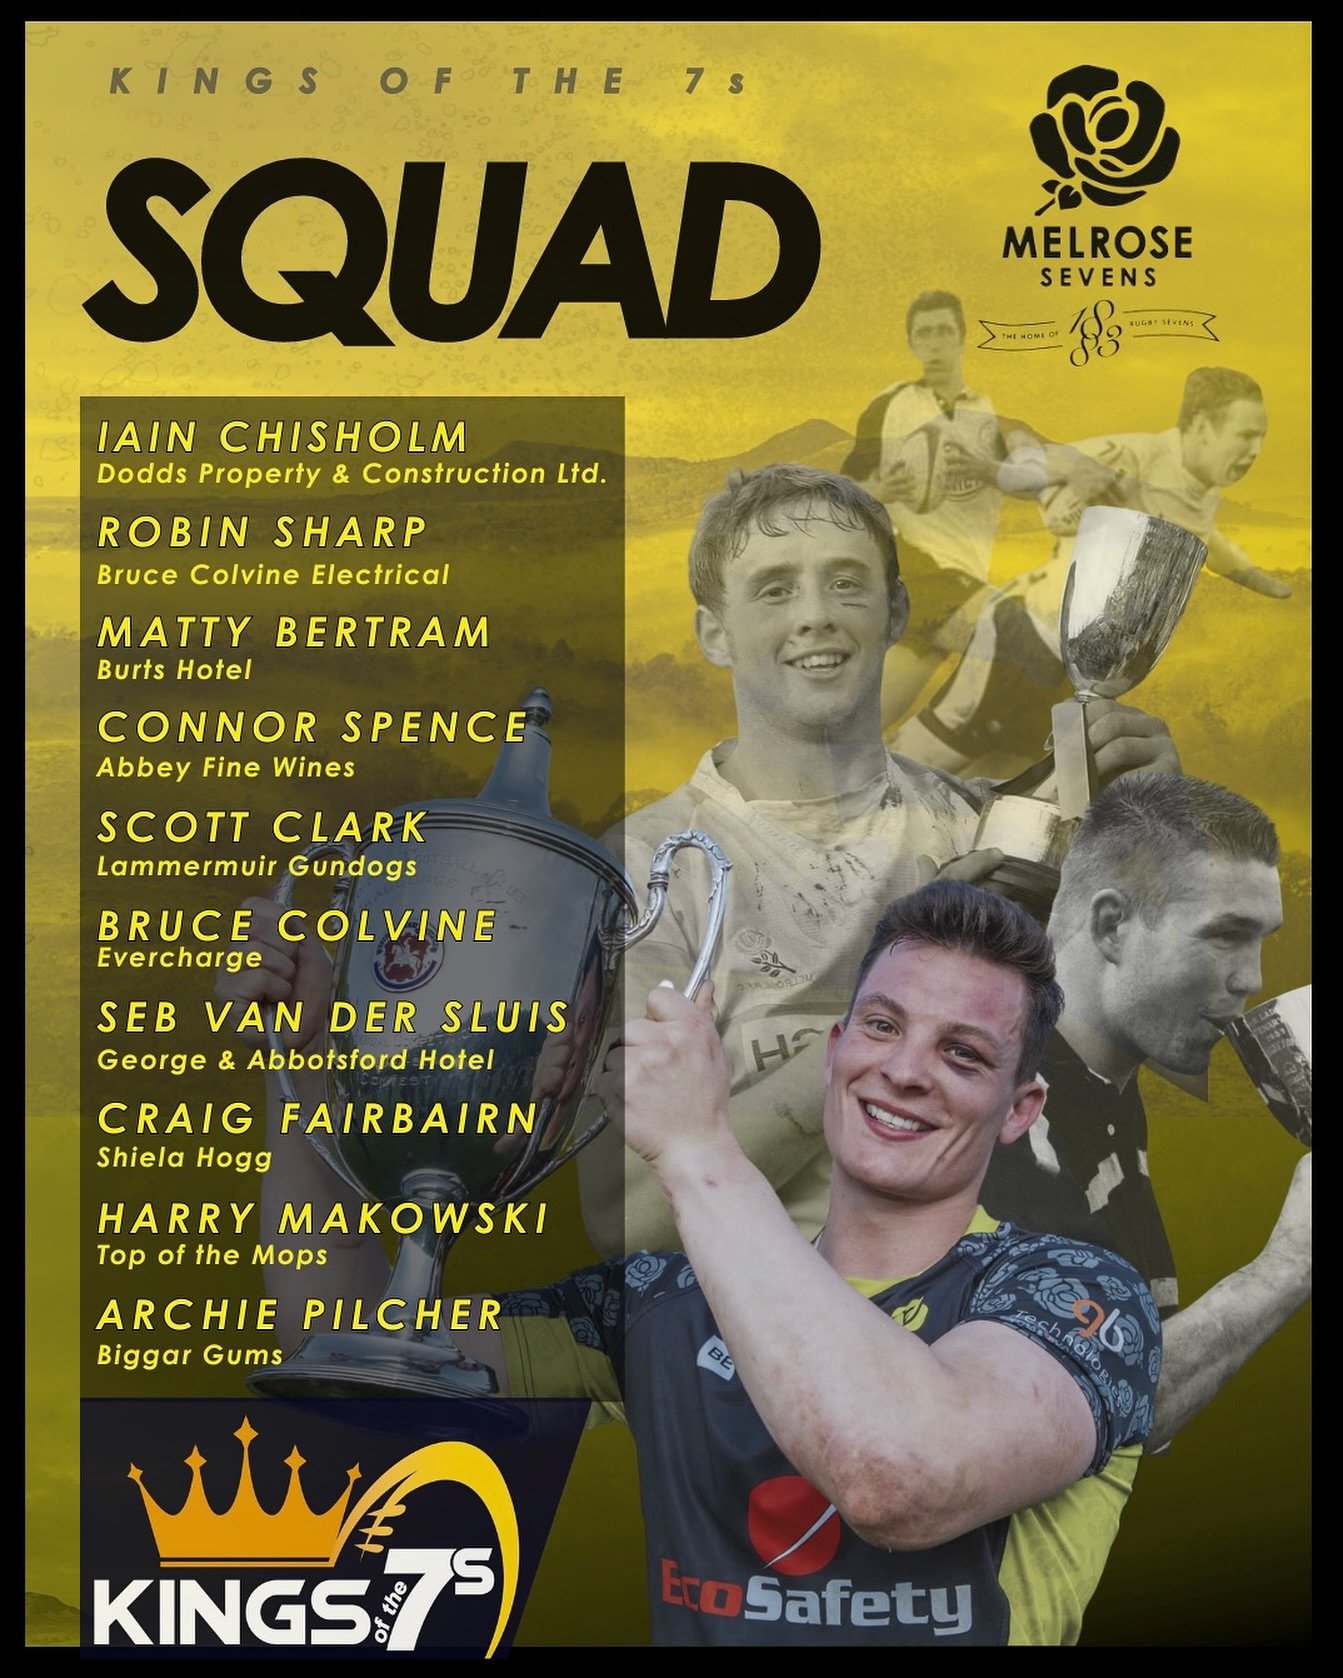 The Melrose squad heading to @selkirkrfc 7s today! 

First Tie v Edinburgh Accies at 16:00